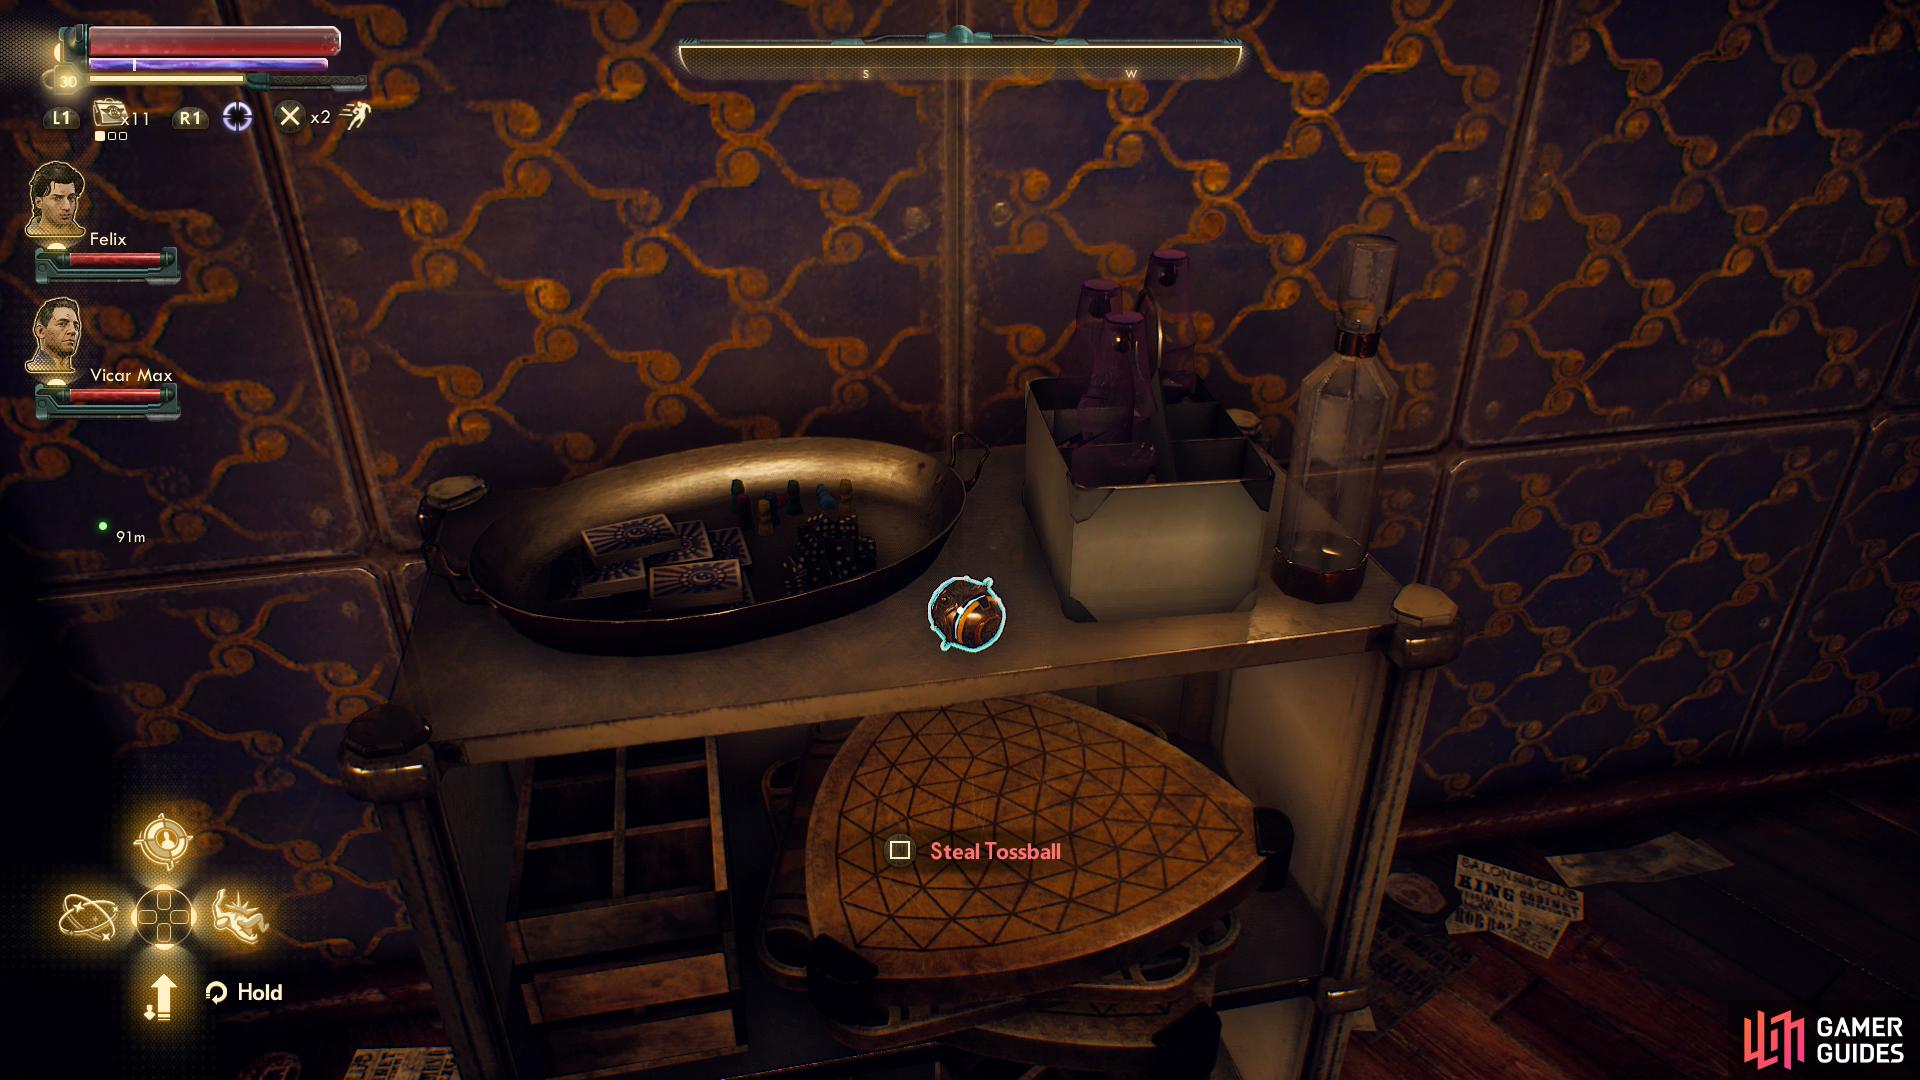 You can also find a decorative Tossball in Malin's House of Hospitality, but you'll probably get caught trying to steal it.